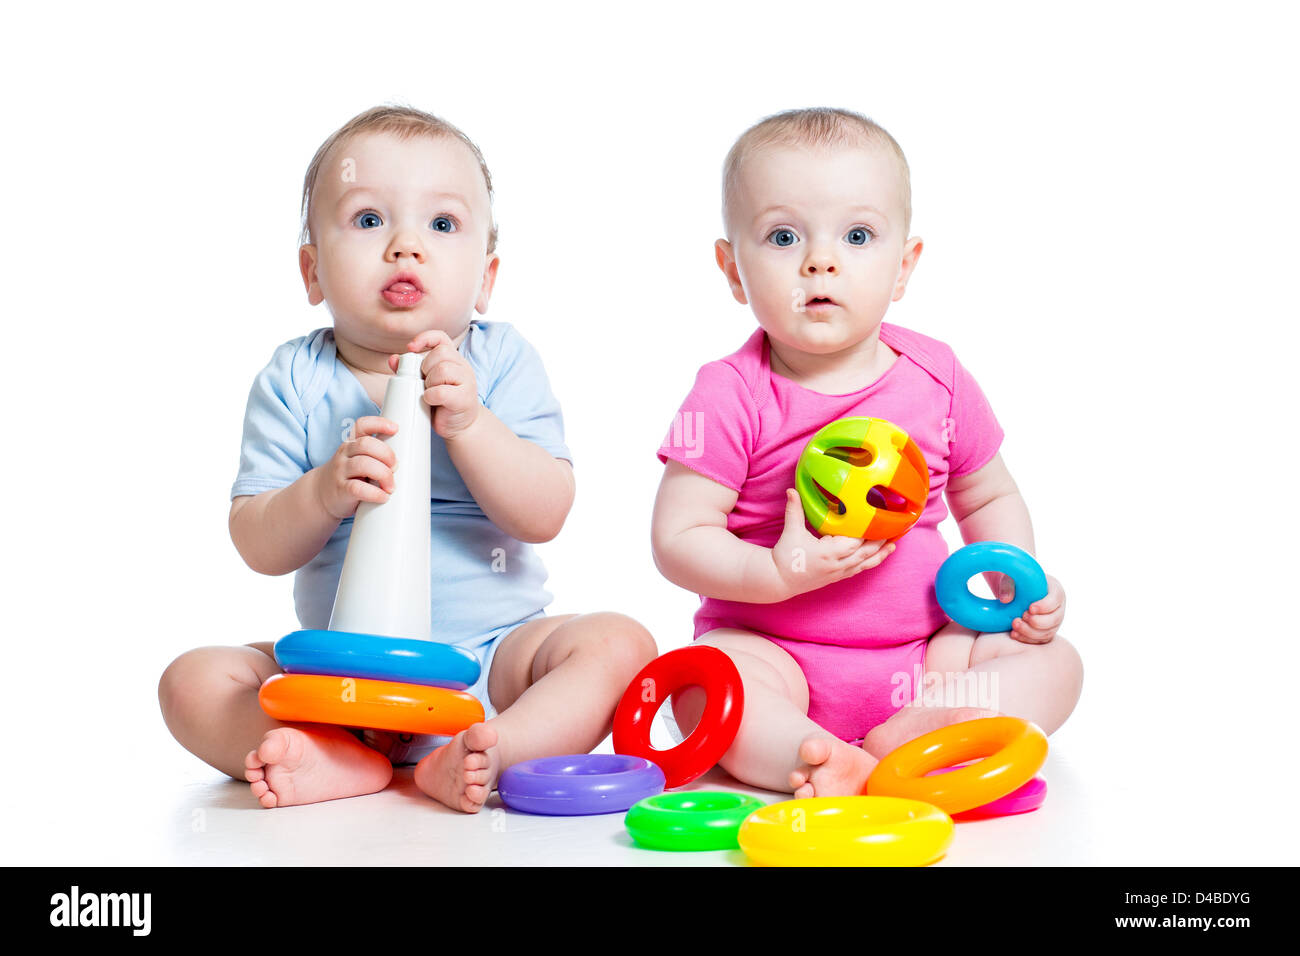 kids boy and girl playing toys together Stock Photo